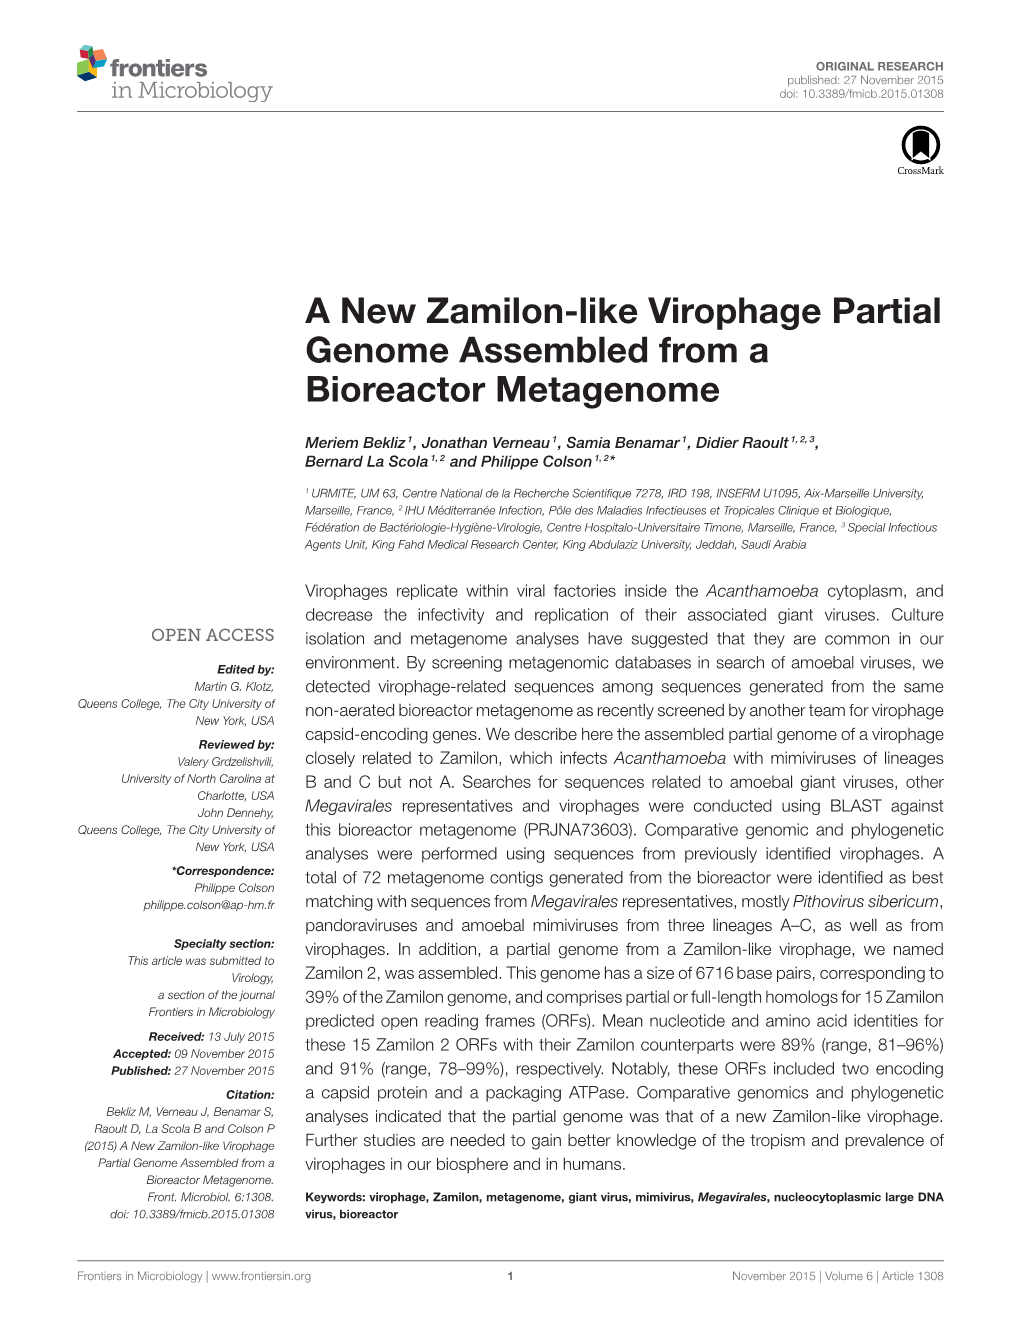 A New Zamilon-Like Virophage Partial Genome Assembled from a Bioreactor Metagenome